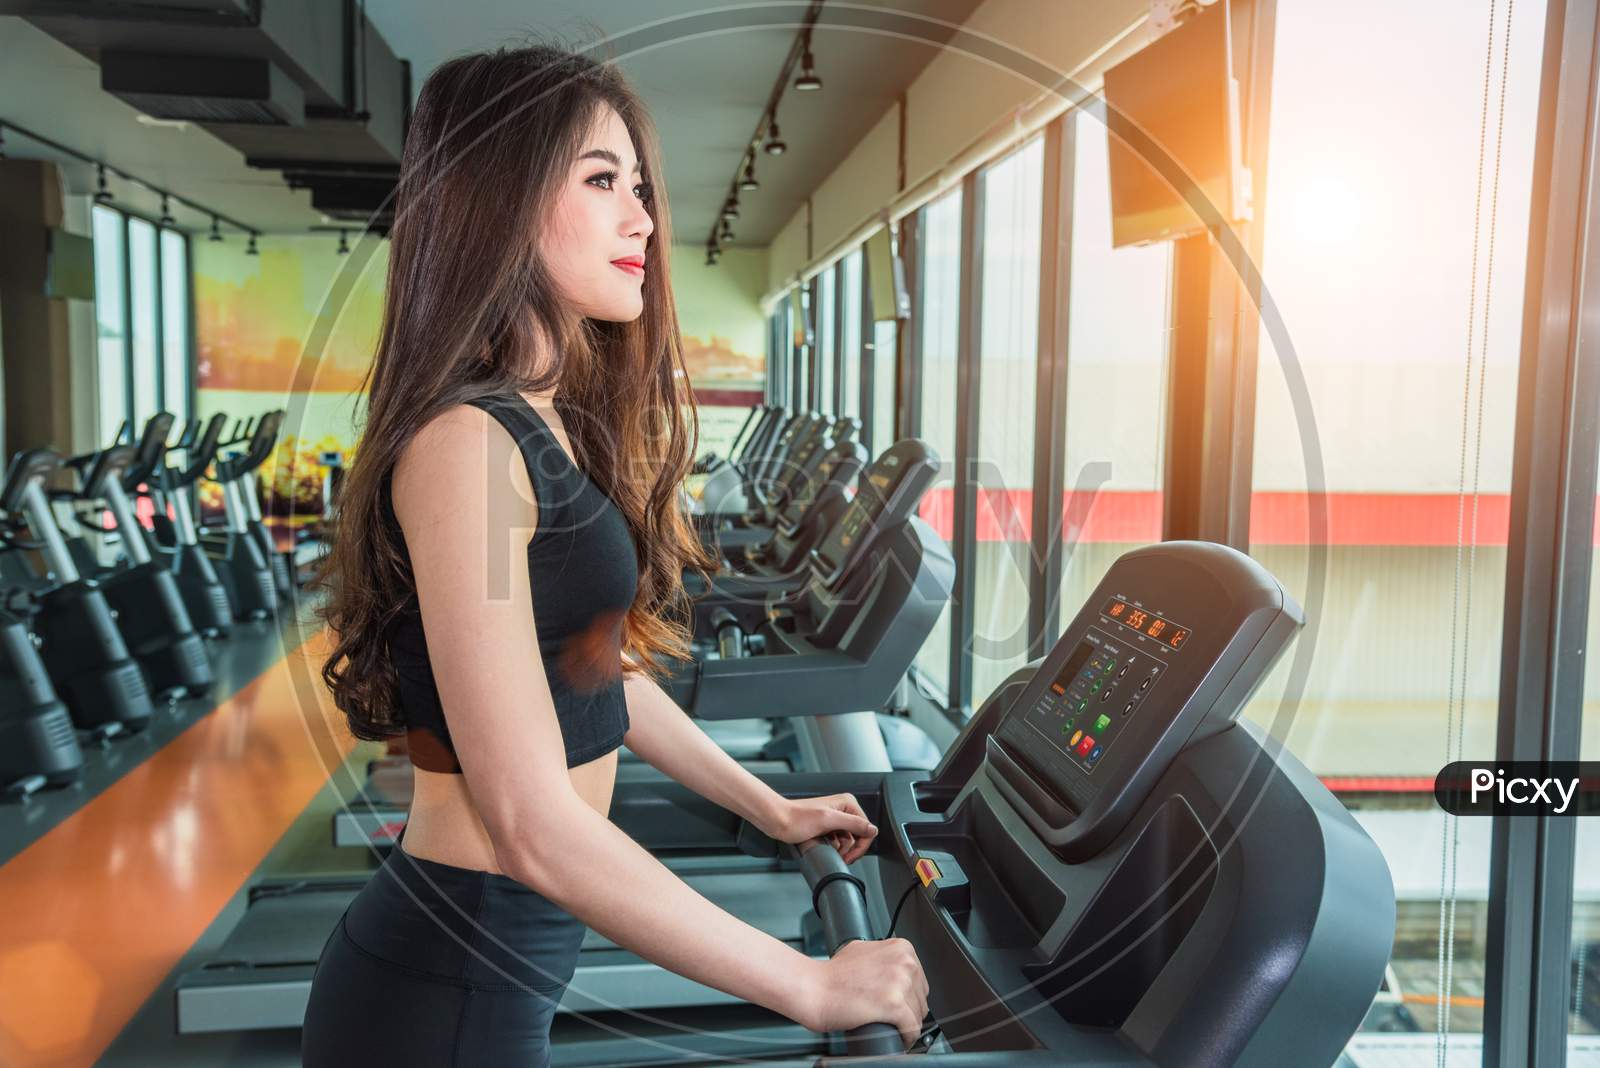 Asian Sport Woman Walking Or Running On Treadmill Equipment In Fitness Workout Gym. Sport And Beauty Concept. Workout And Strength Training Theme. Cardio And Diet Theme